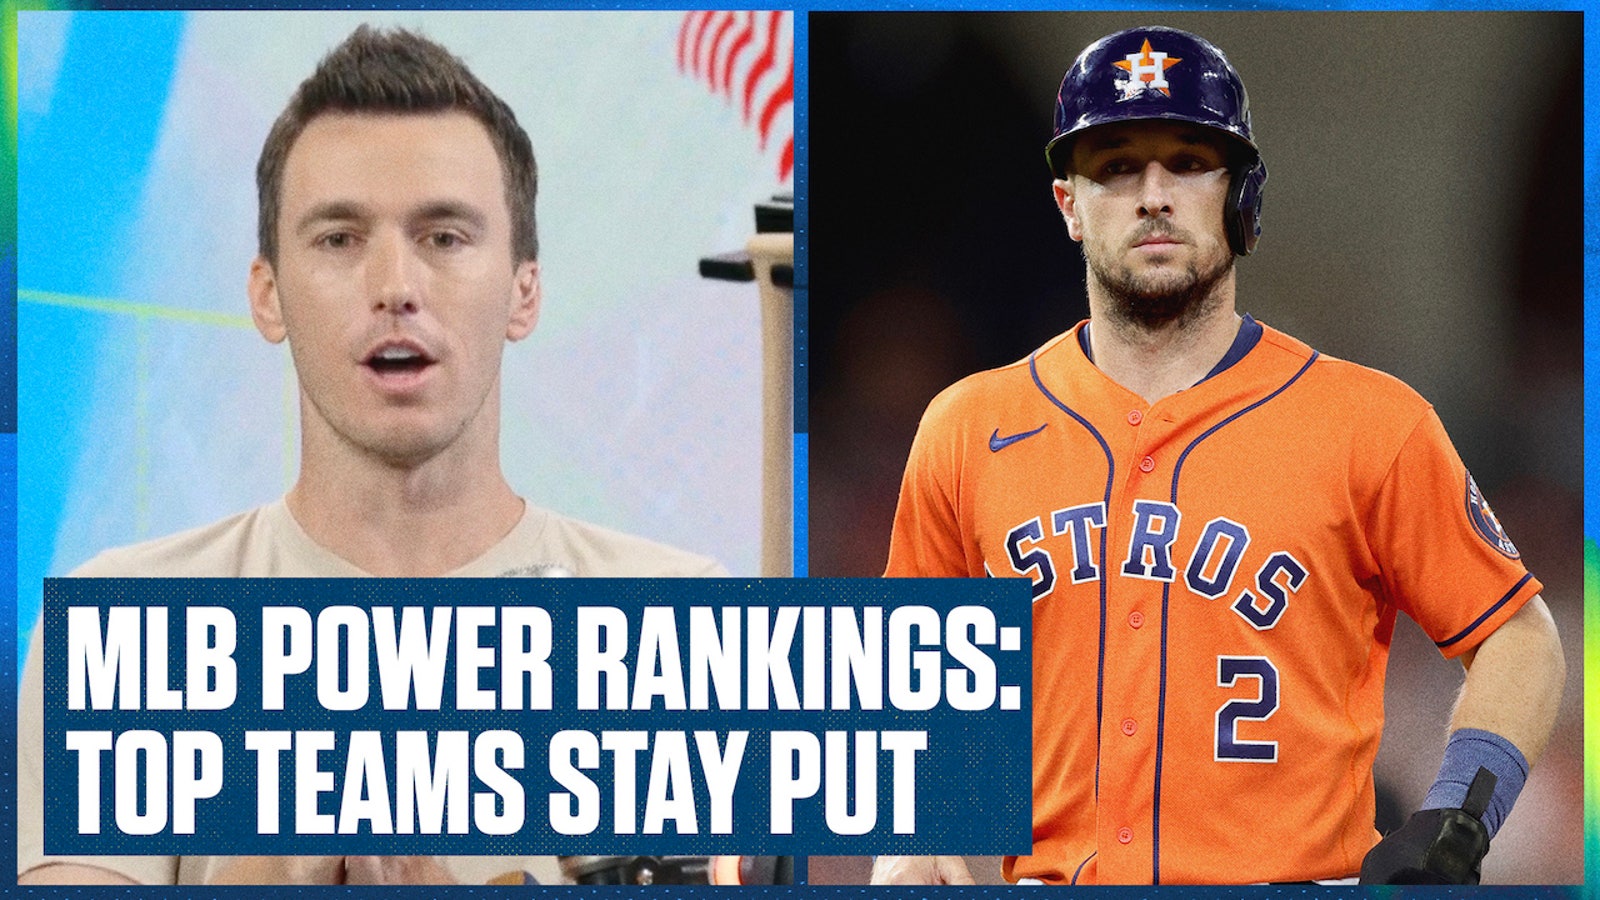 MLB Power Rankings: Astros, Dodgers, Mets show no signs of slowing down